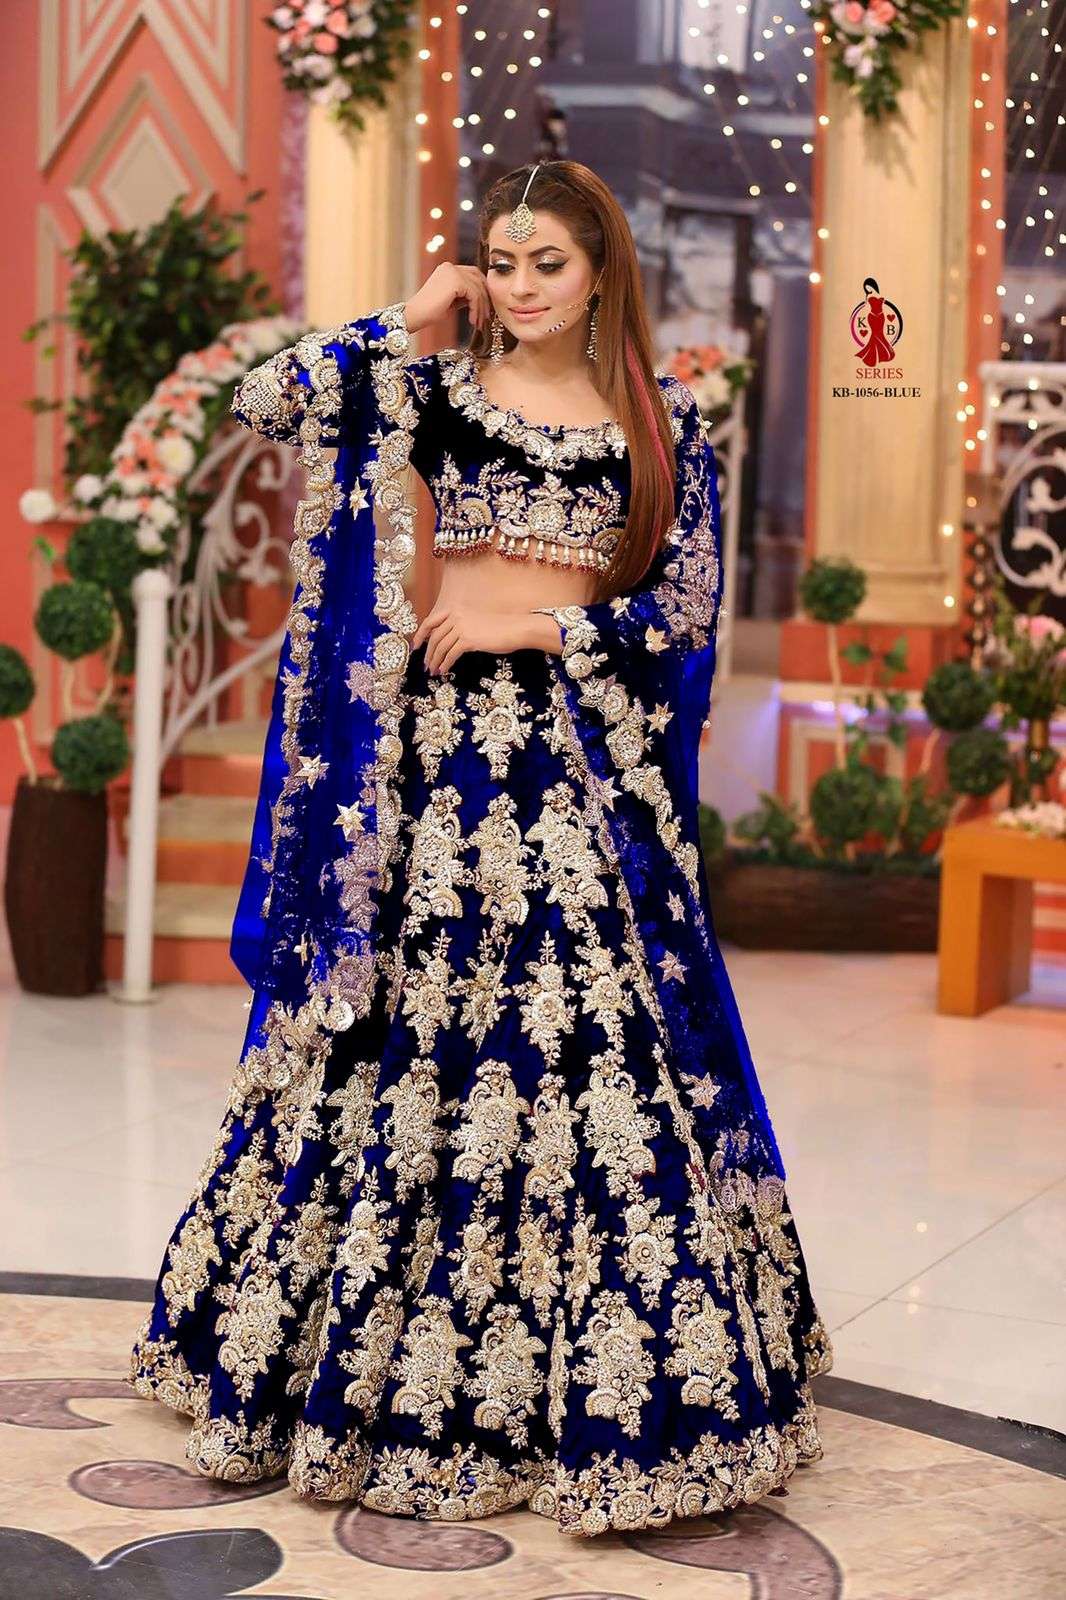 HOGSY Embroidered Semi Stitched Lehenga Choli - Buy HOGSY Embroidered Semi  Stitched Lehenga Choli Online at Best Prices in India | Flipkart.com